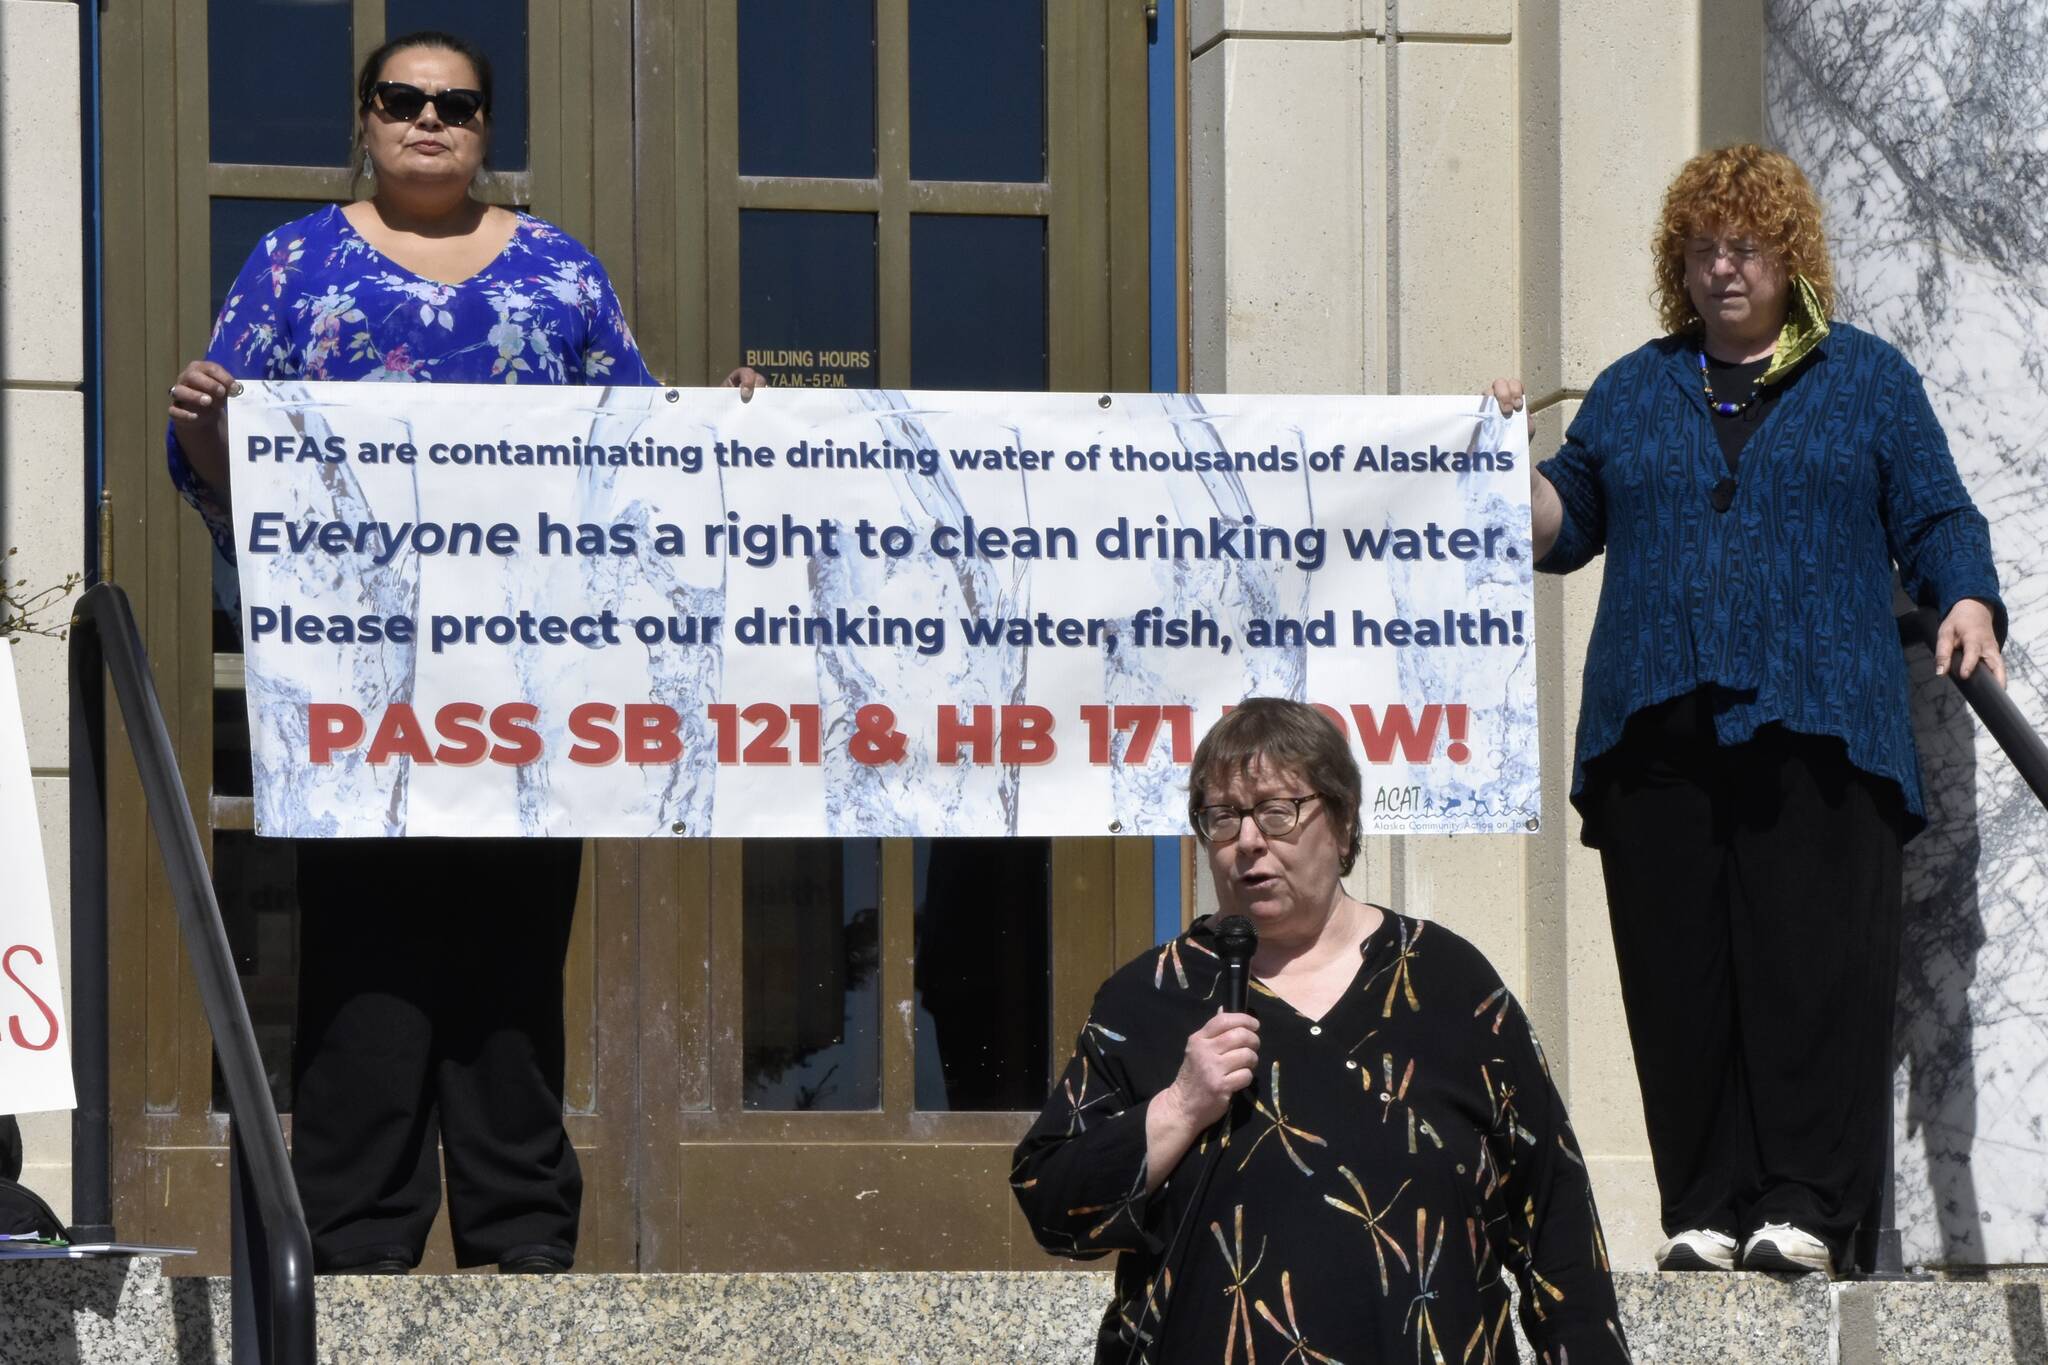 Pamela Miller, executive director of Alaska Community Action on Toxics, speaks at a rally at the Alaska State Capitol on Thursday, May 12, 2022, calling on lawmakers to pass legislation regulating PFAS chemicals, so-called ‘forever chemicals’ that have been found to contaminate water and cause health issues. PFAS contamination has been found at several sites around the state, mainly around airports where the chemicals are used in fire-fighting foams. (Peter Segall / Juneau Empire)